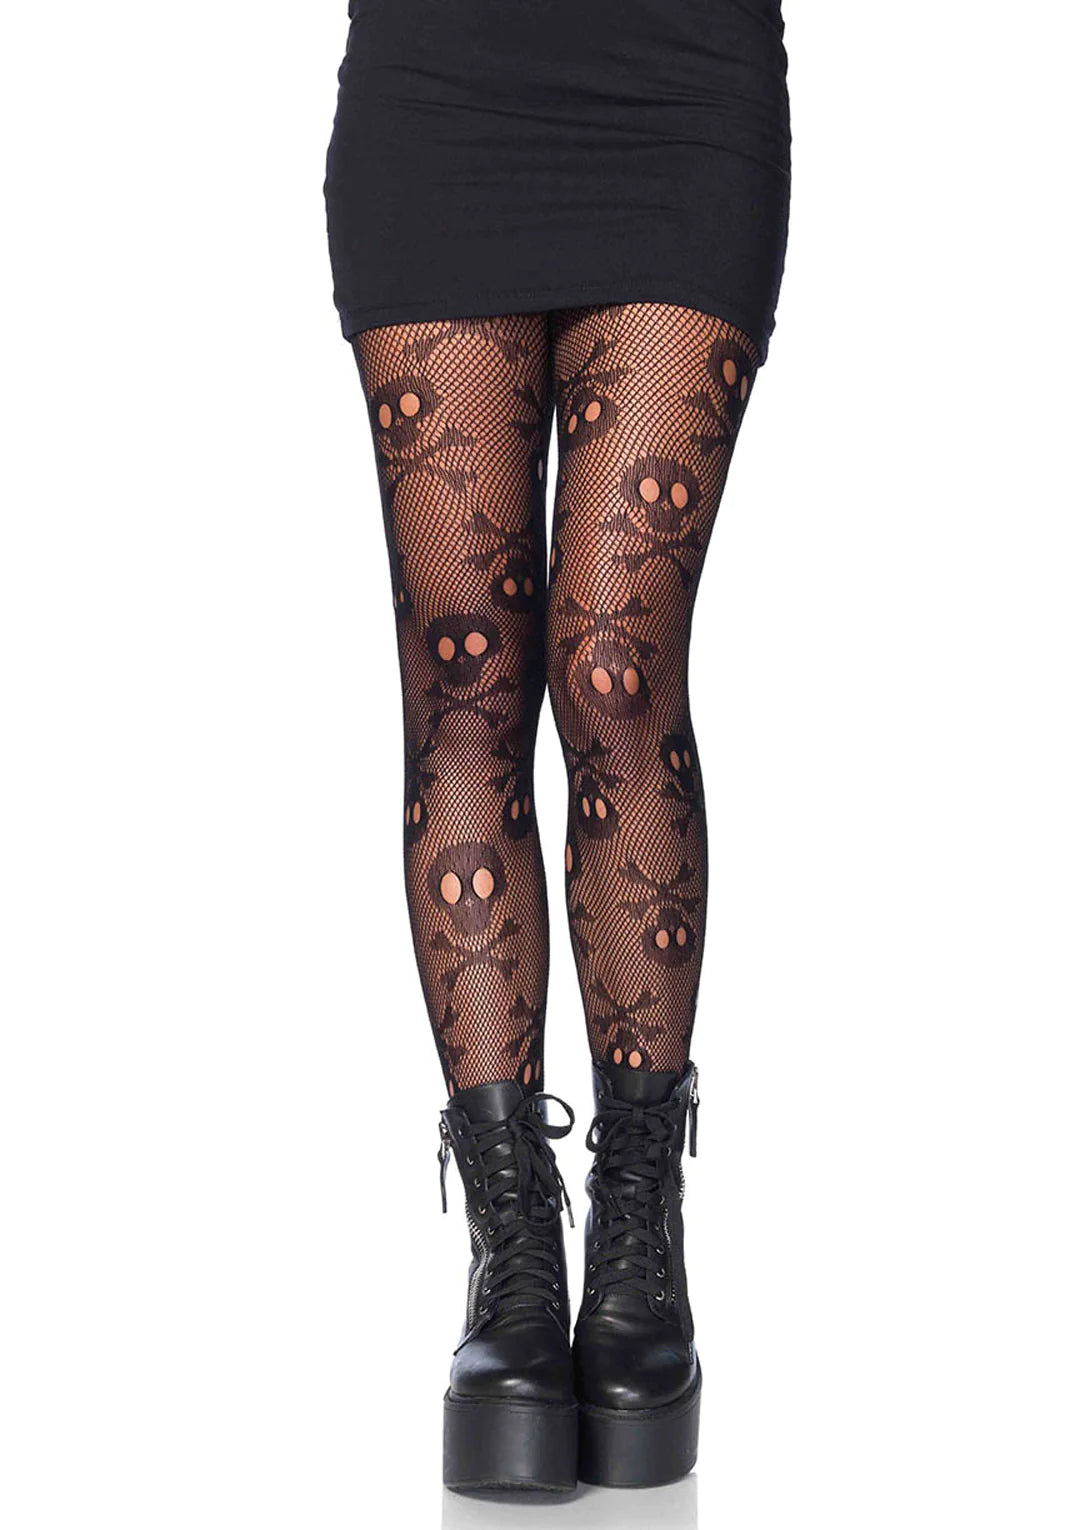  Rubie's Costume Co Skull Print Tights Costume : Toys & Games